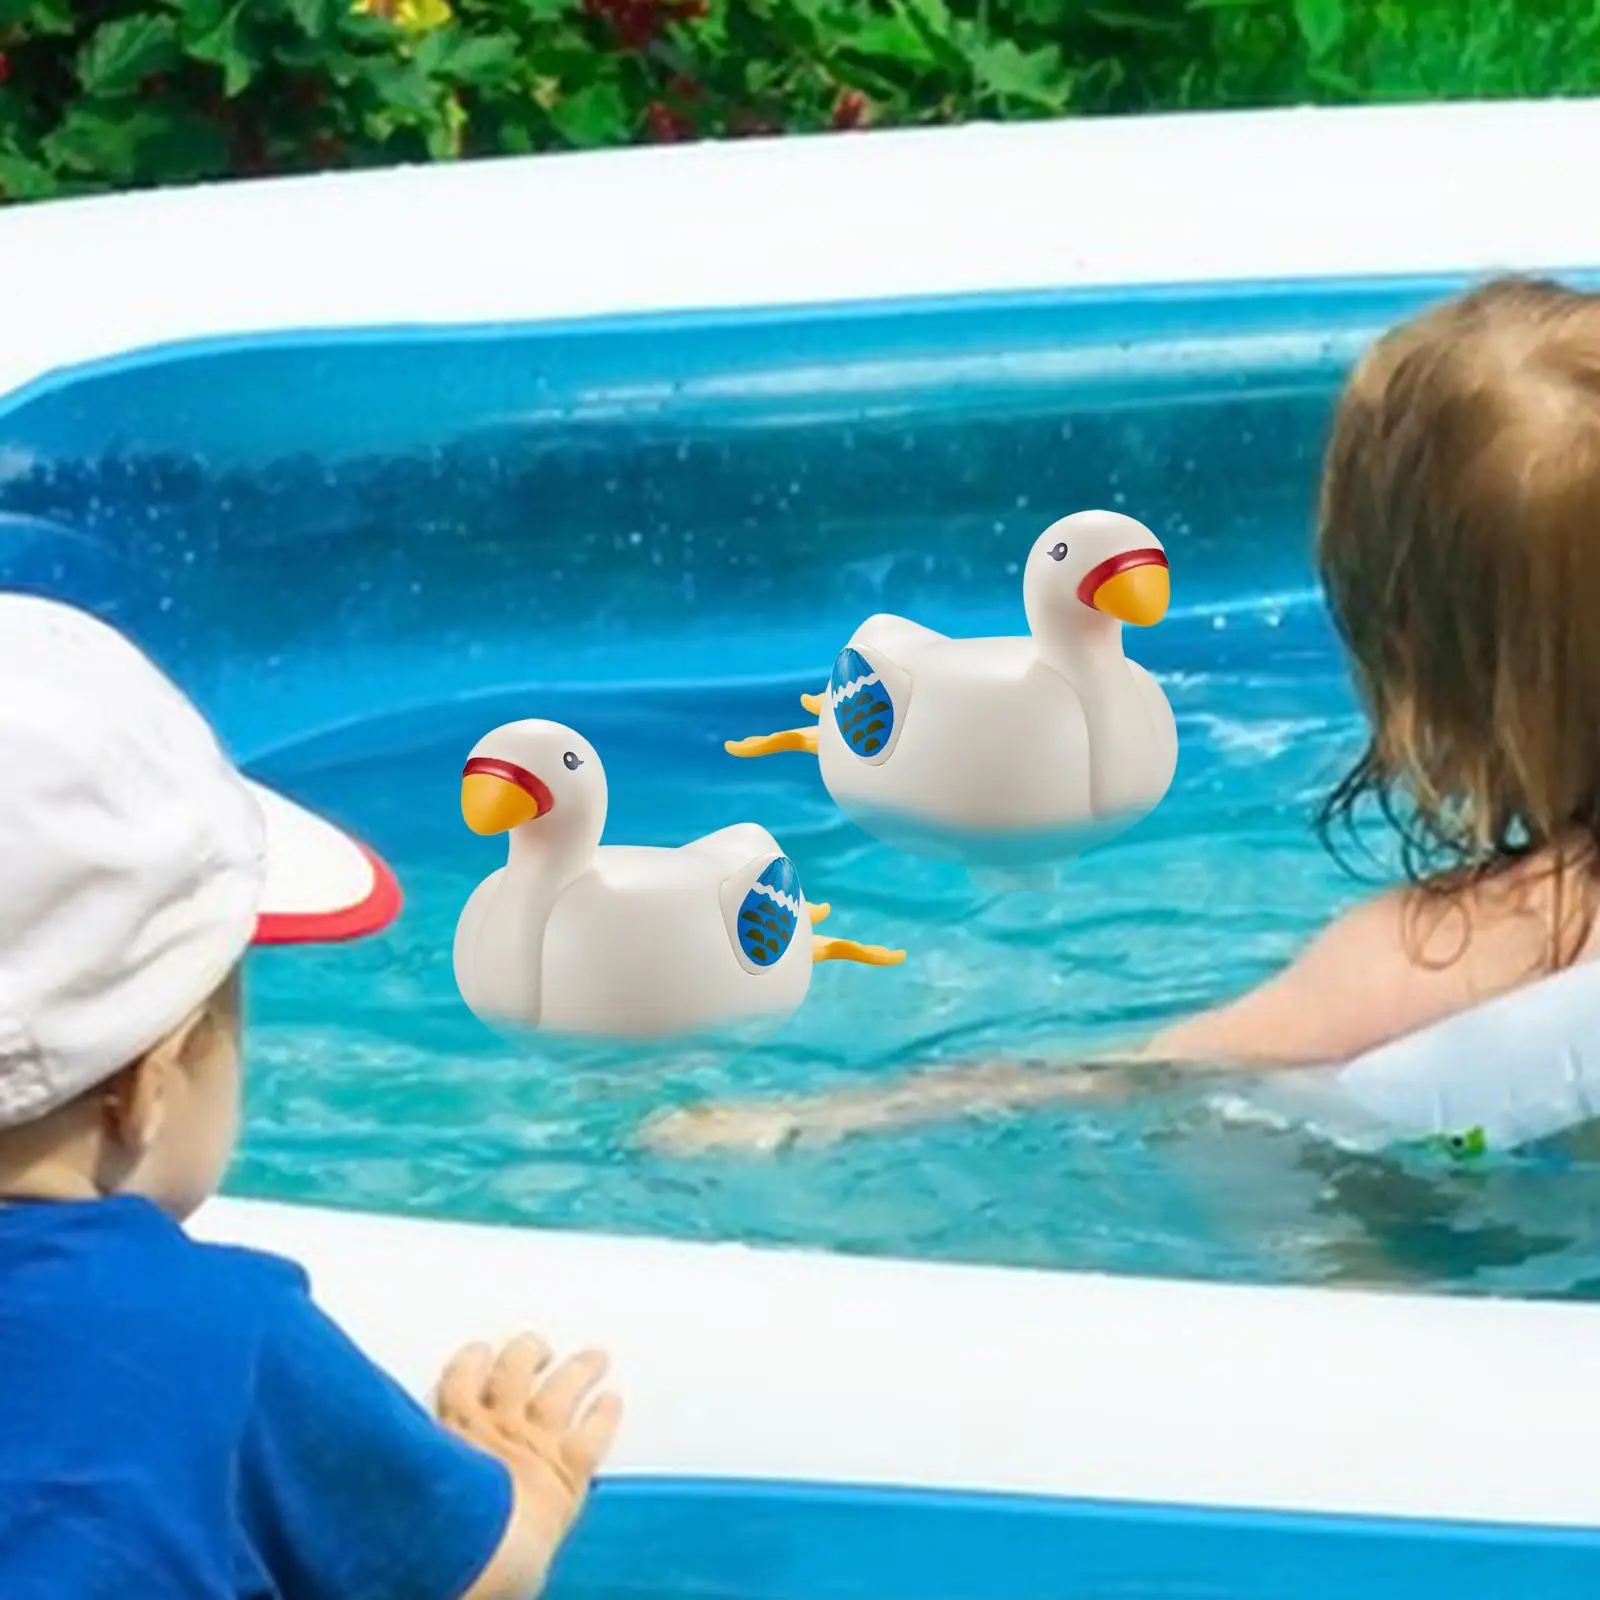 Swan Bath Toys Outdoor Activities Toy Water Toy Toddler Bath Toy for Toddlers